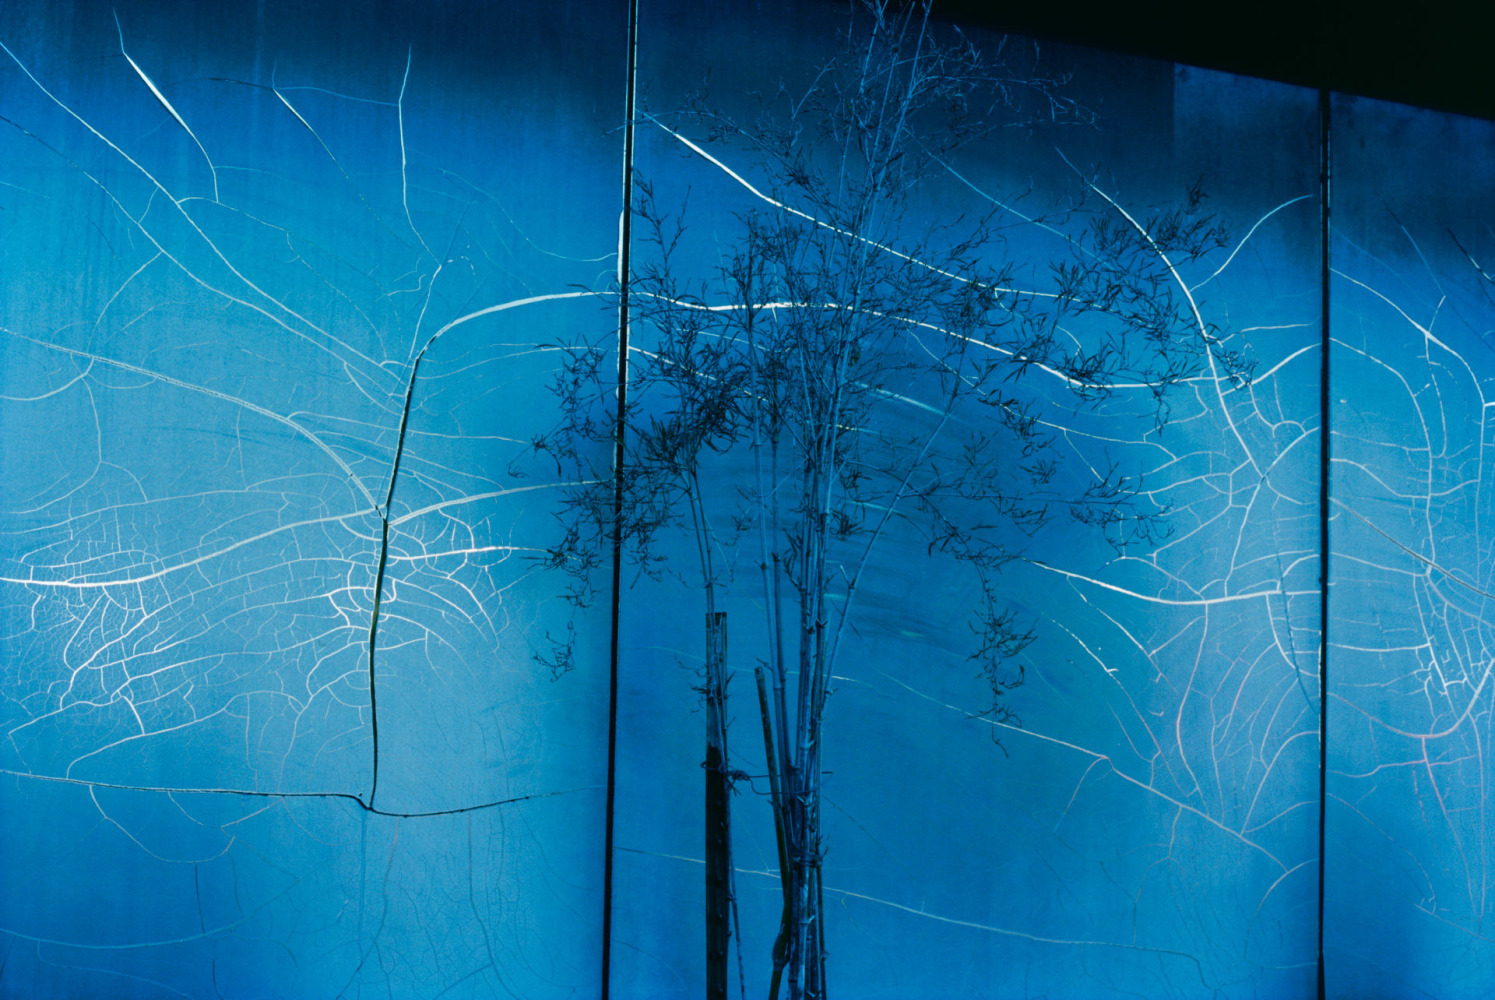 Untitled (Blue Wall), 2022

archival pigment print, edition of 3 + 2 AP

24&amp;nbsp;&amp;times; 36 in. / 61&amp;nbsp;&amp;times; 91.4 cm